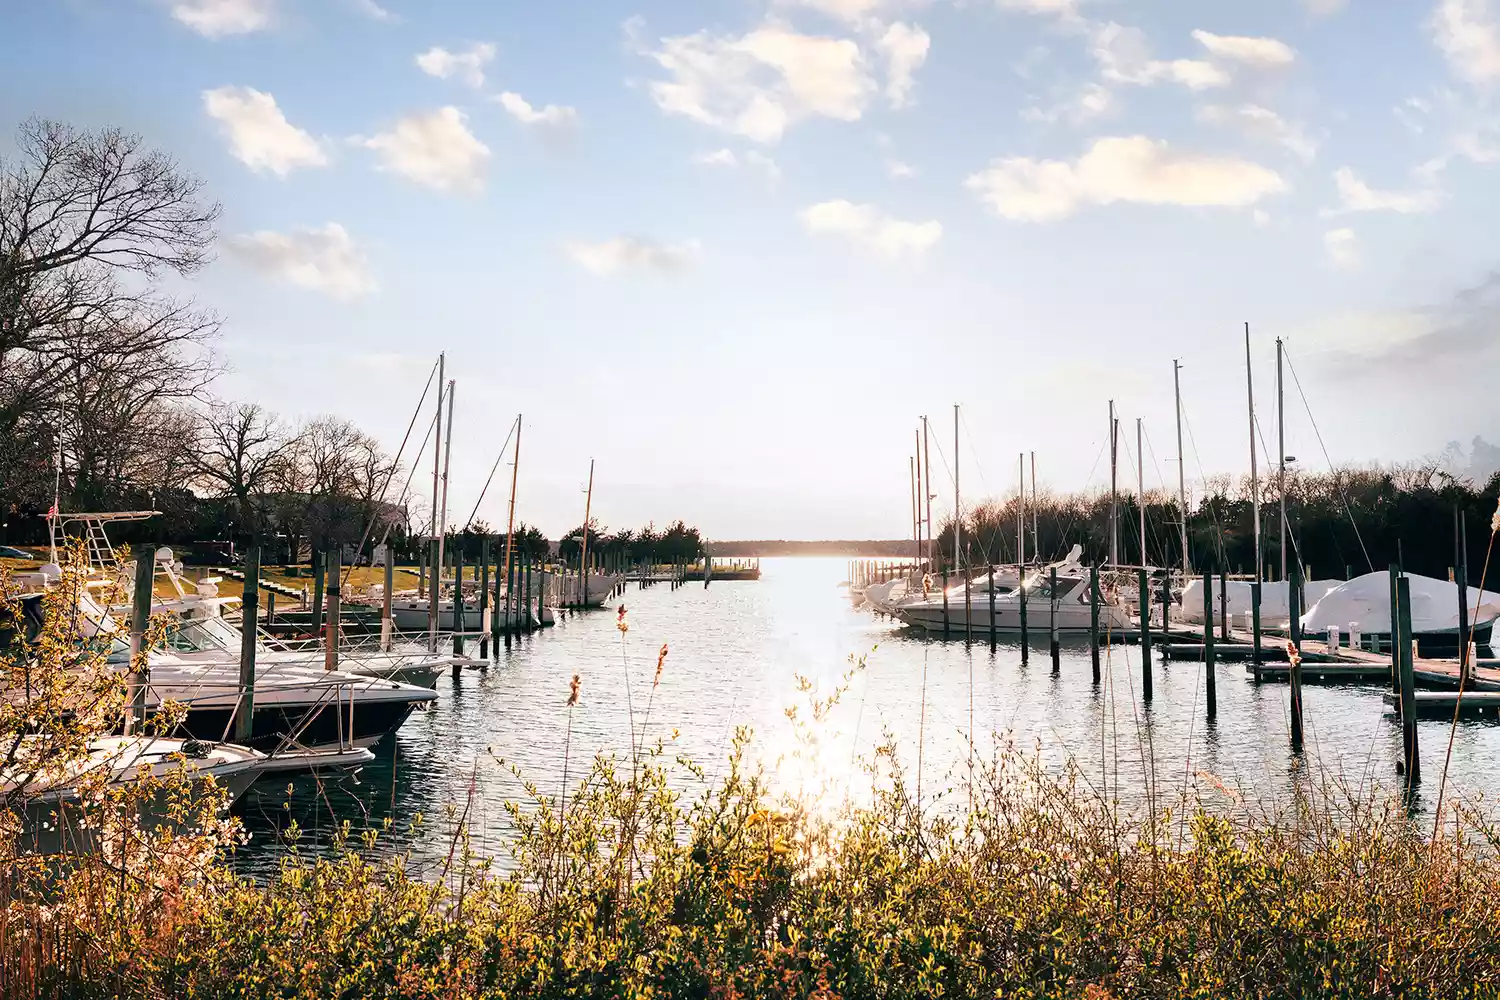 The Best Hotels, Restaurants, and Shops in the Hamptons: Your Guide to the Ideal Long Weekend